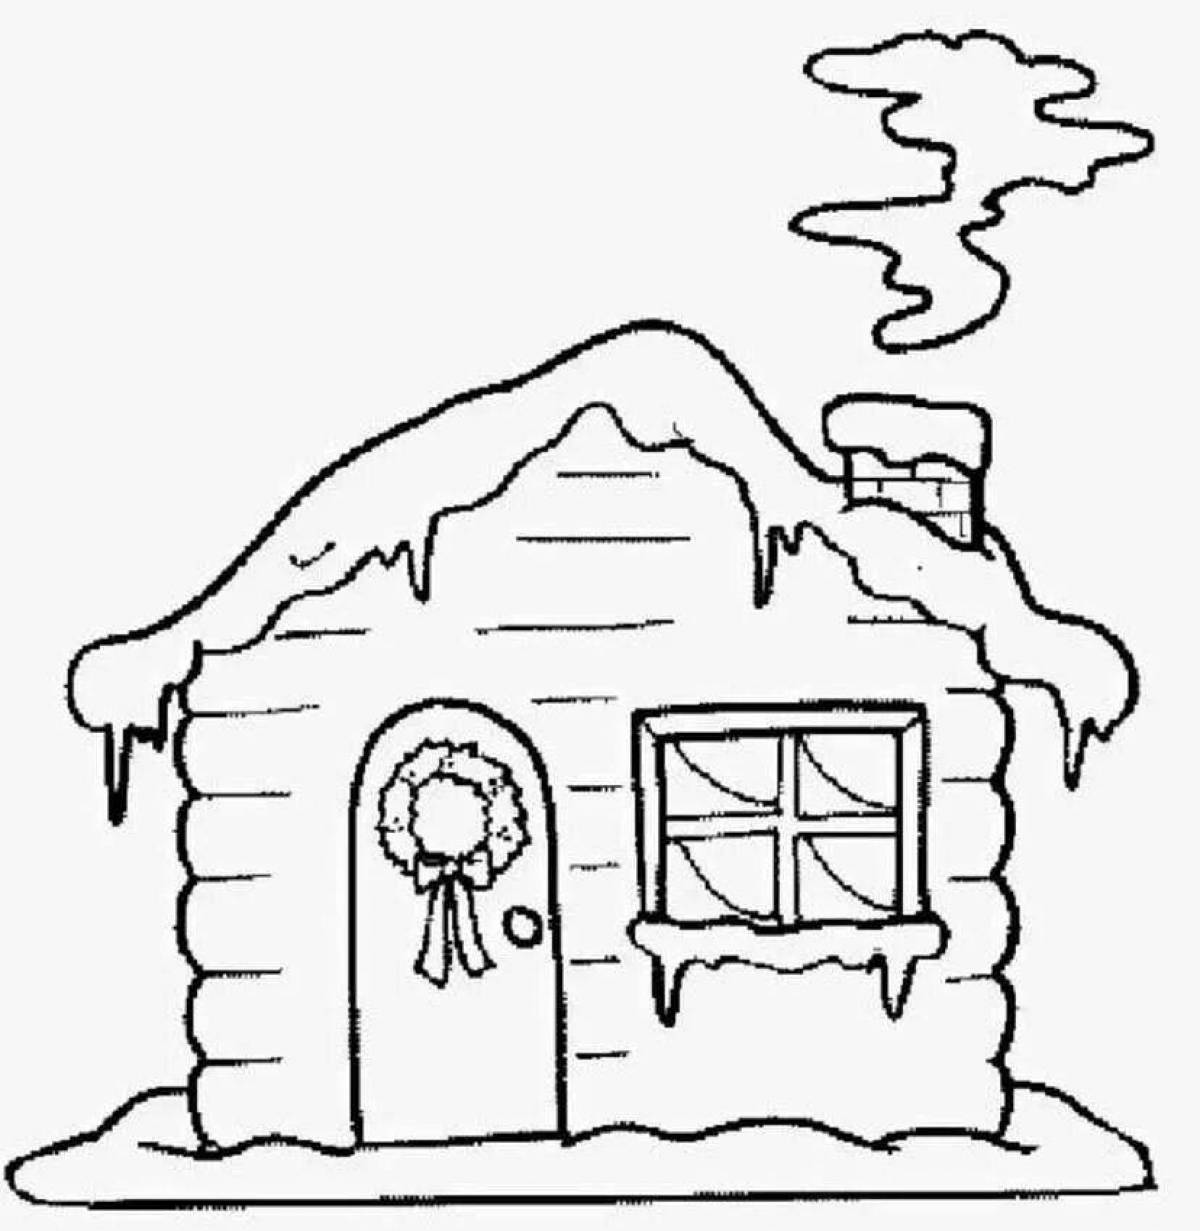 Exquisite snow house coloring page